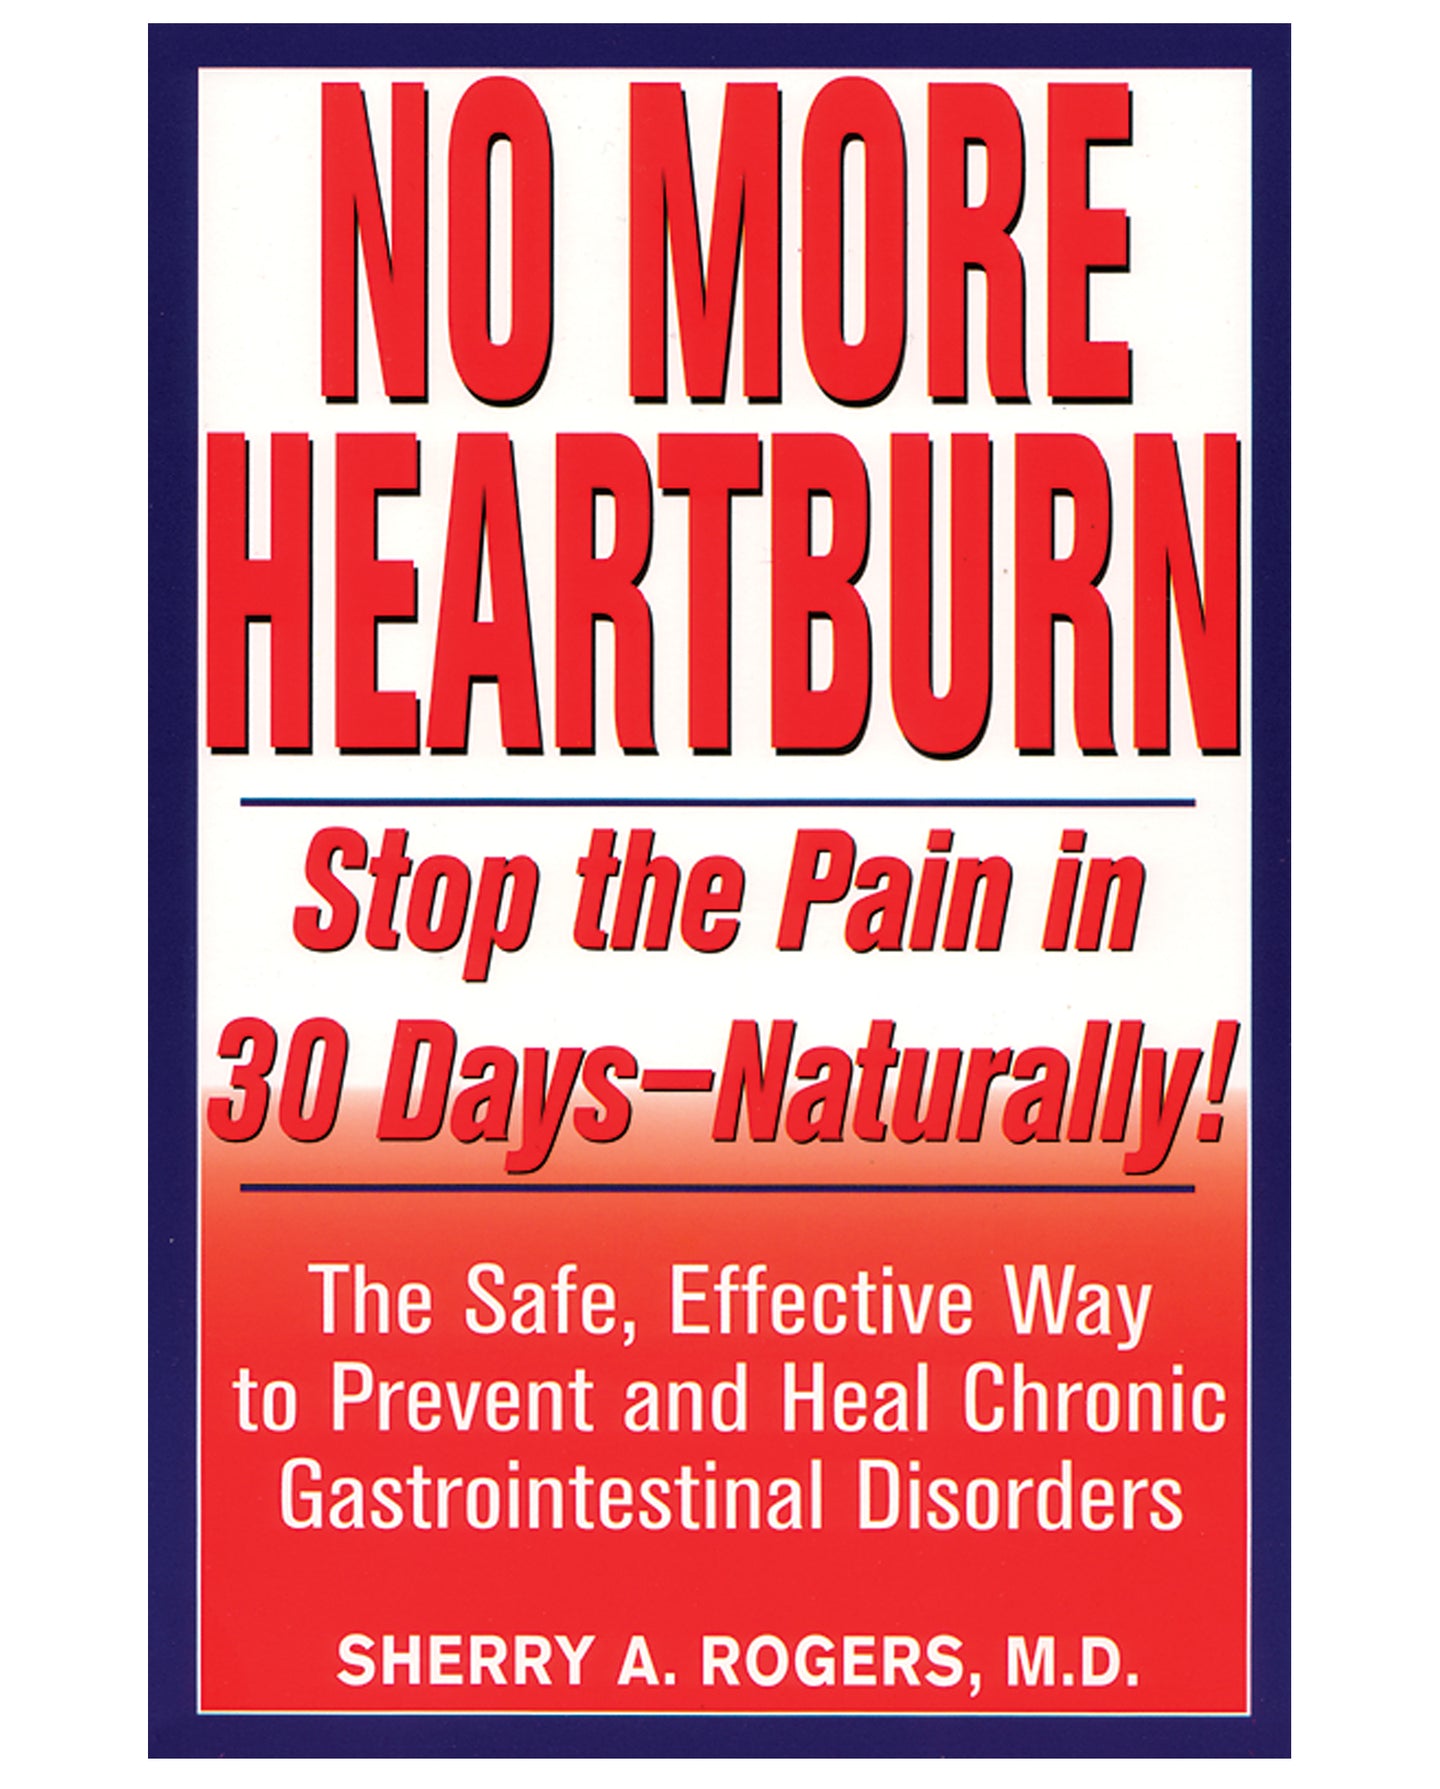 No More Heartburn by Sherry A. Rogers M.D.